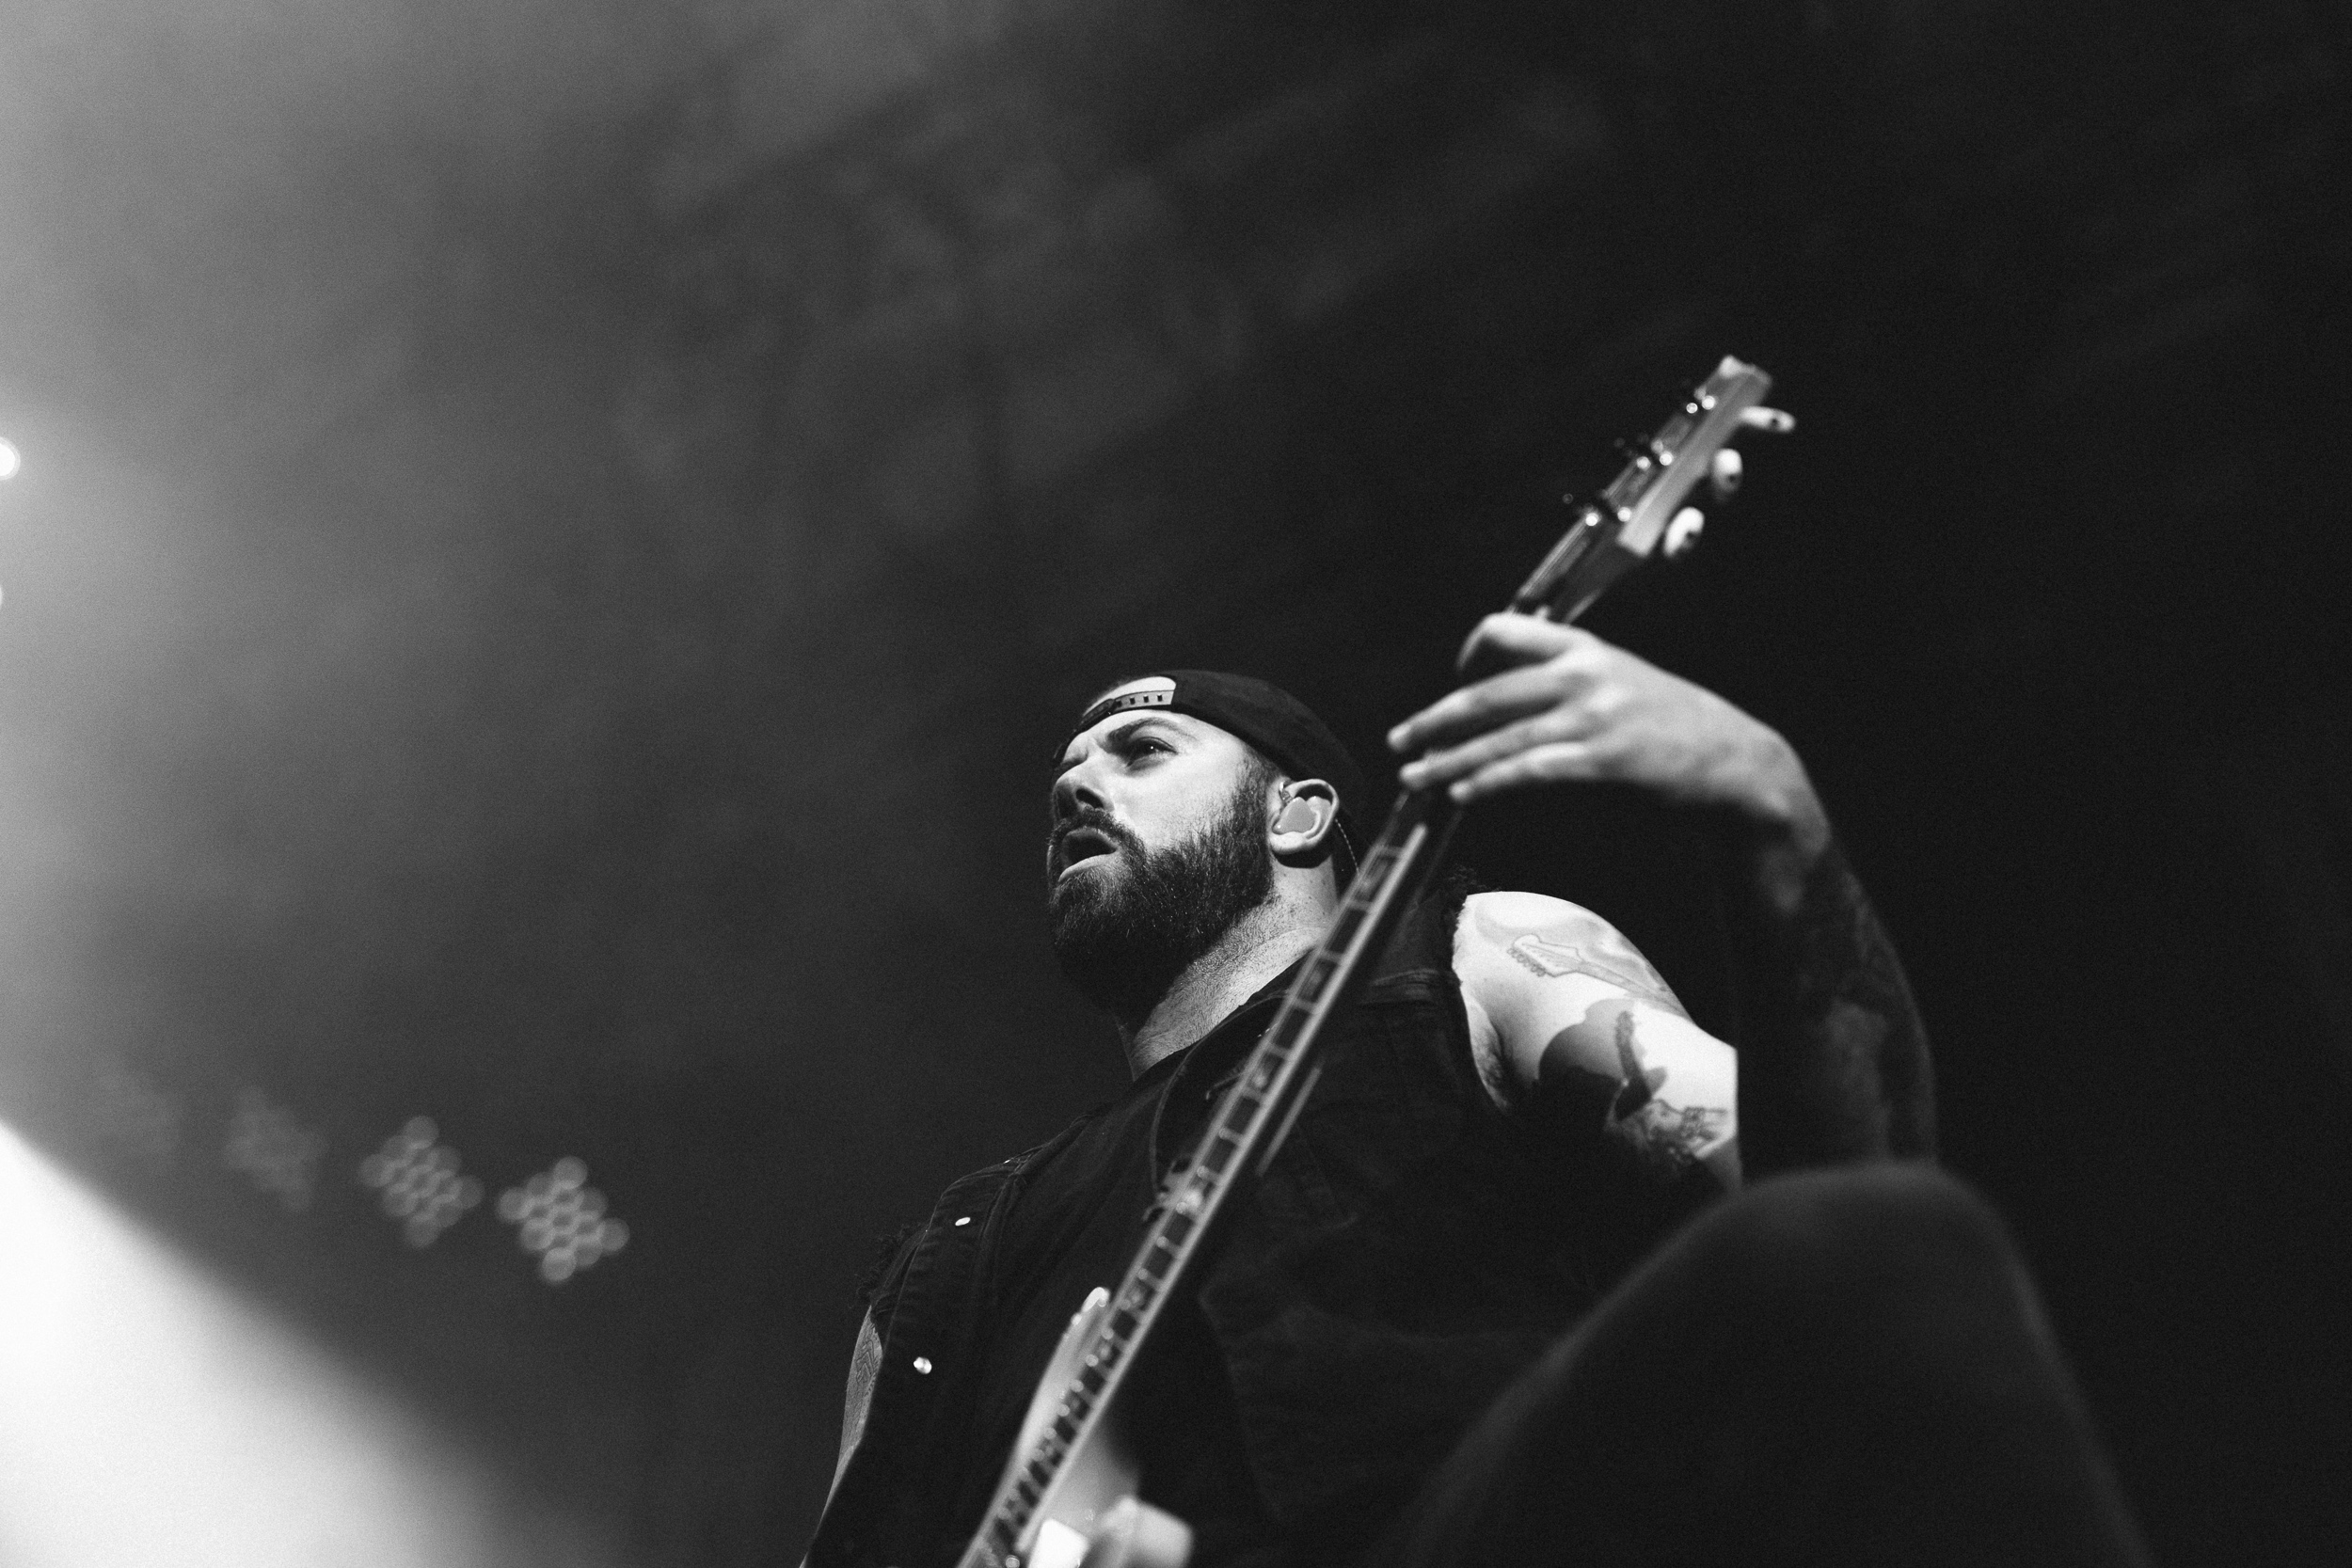 Kevin Skaff of A Day to Remember by Adam Elmakias